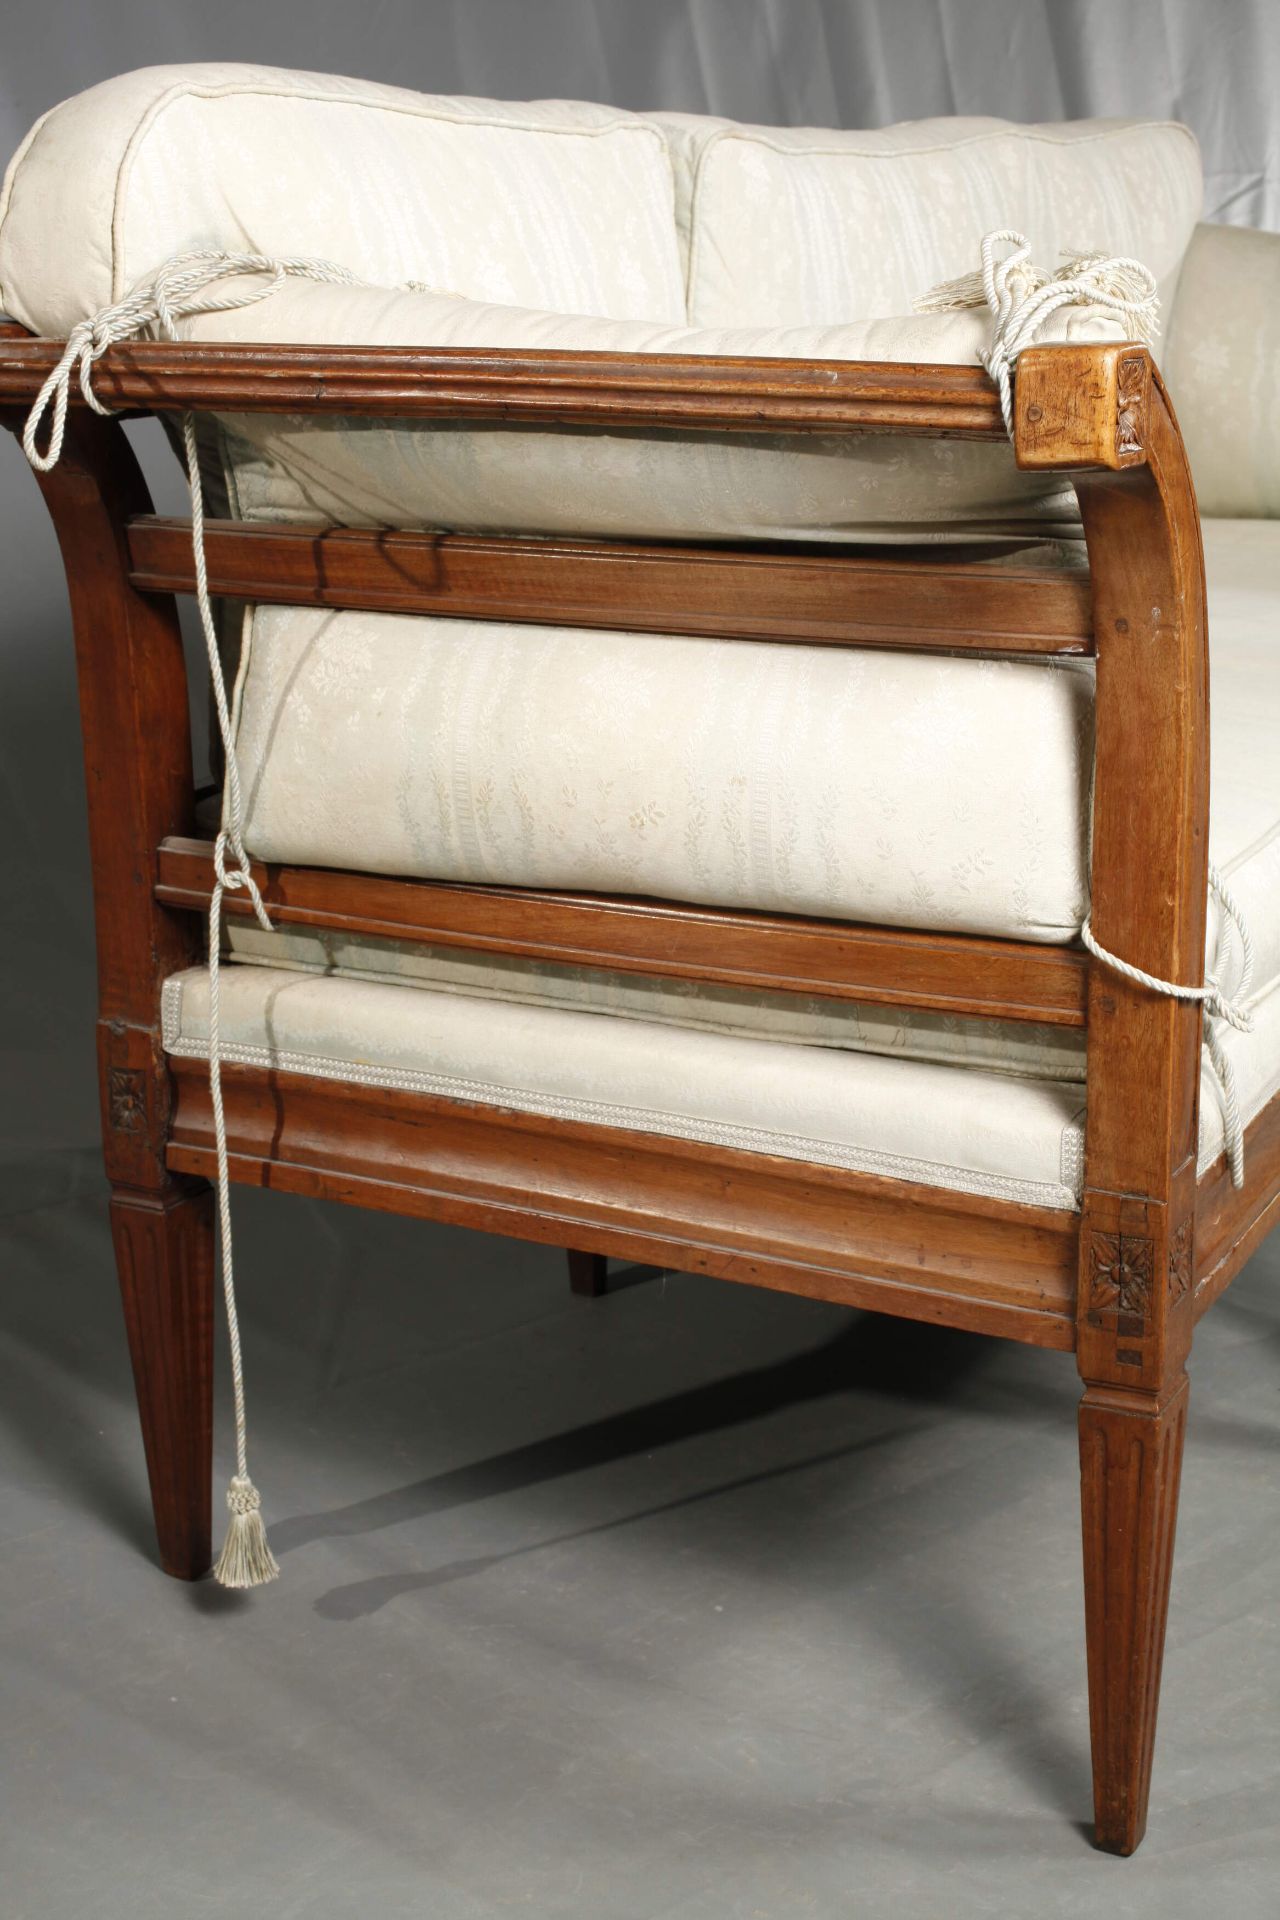 Louis Seize upholstered bench - Image 5 of 8